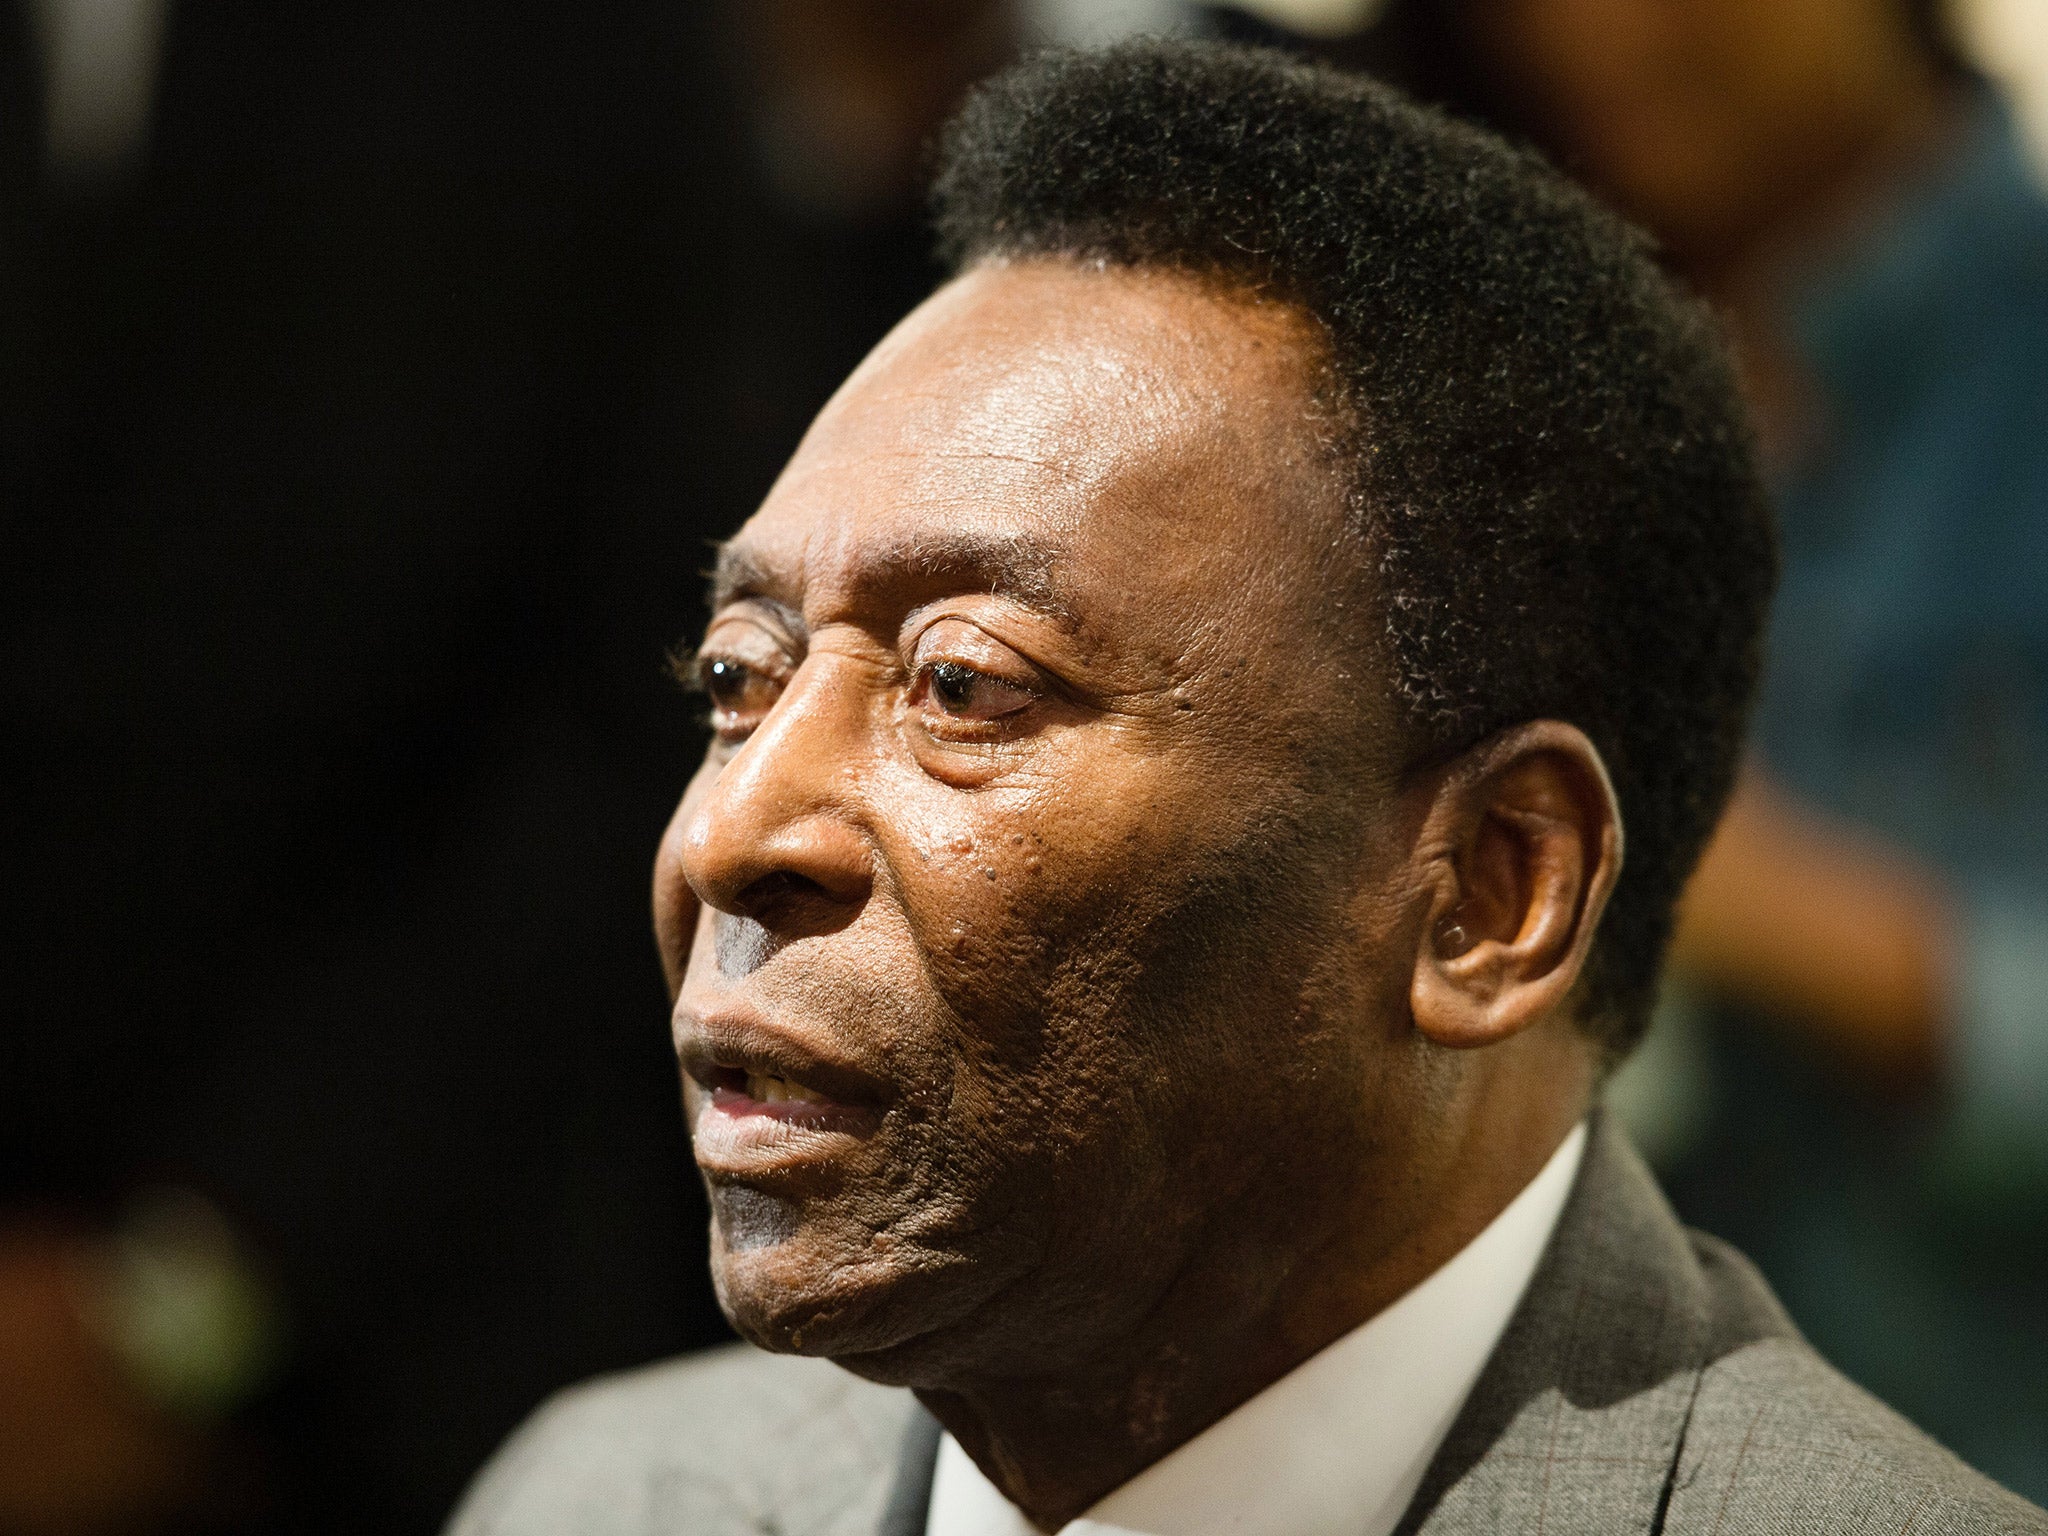 Pele is one of football's greatest-ever players